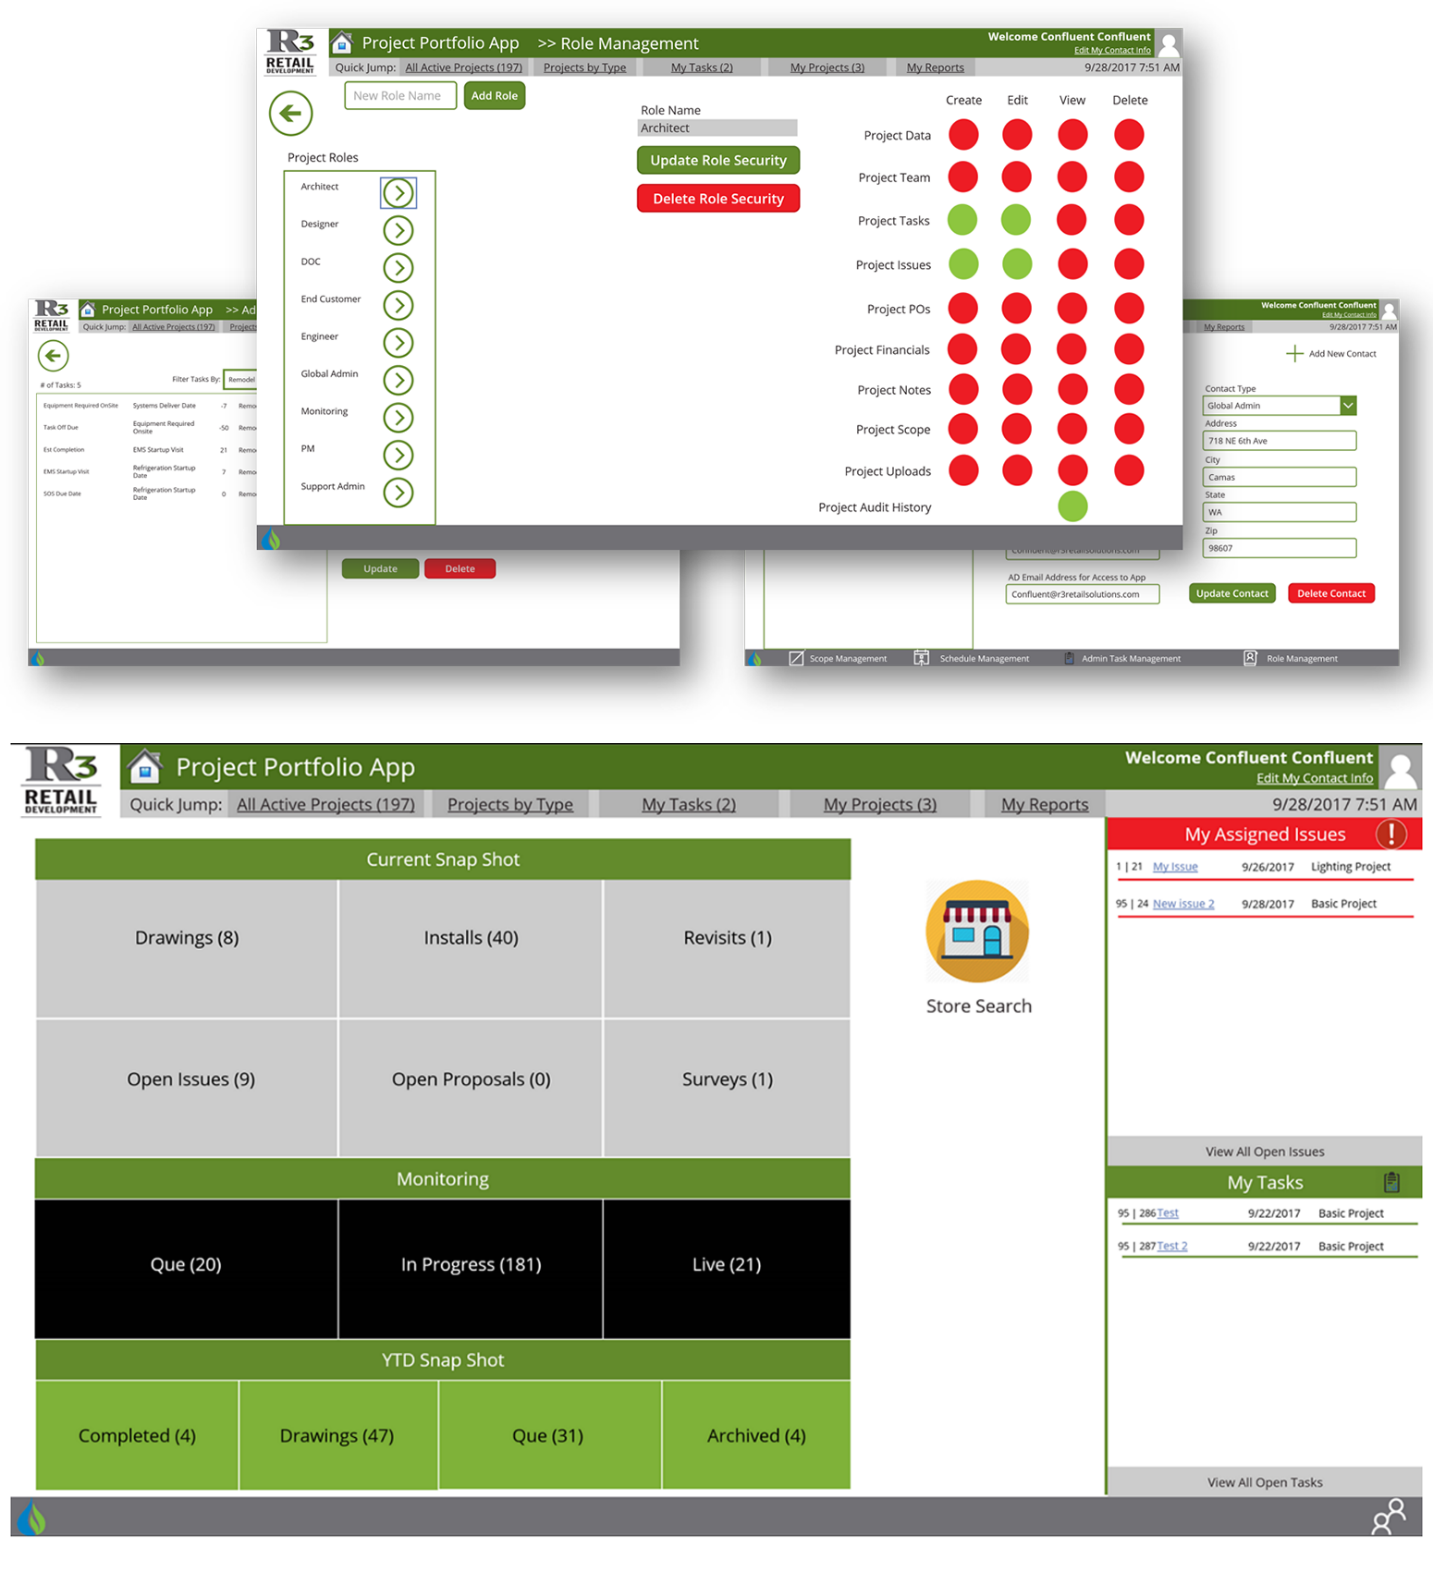 Screenshot of the R3 role management screen and key stats dashboard.